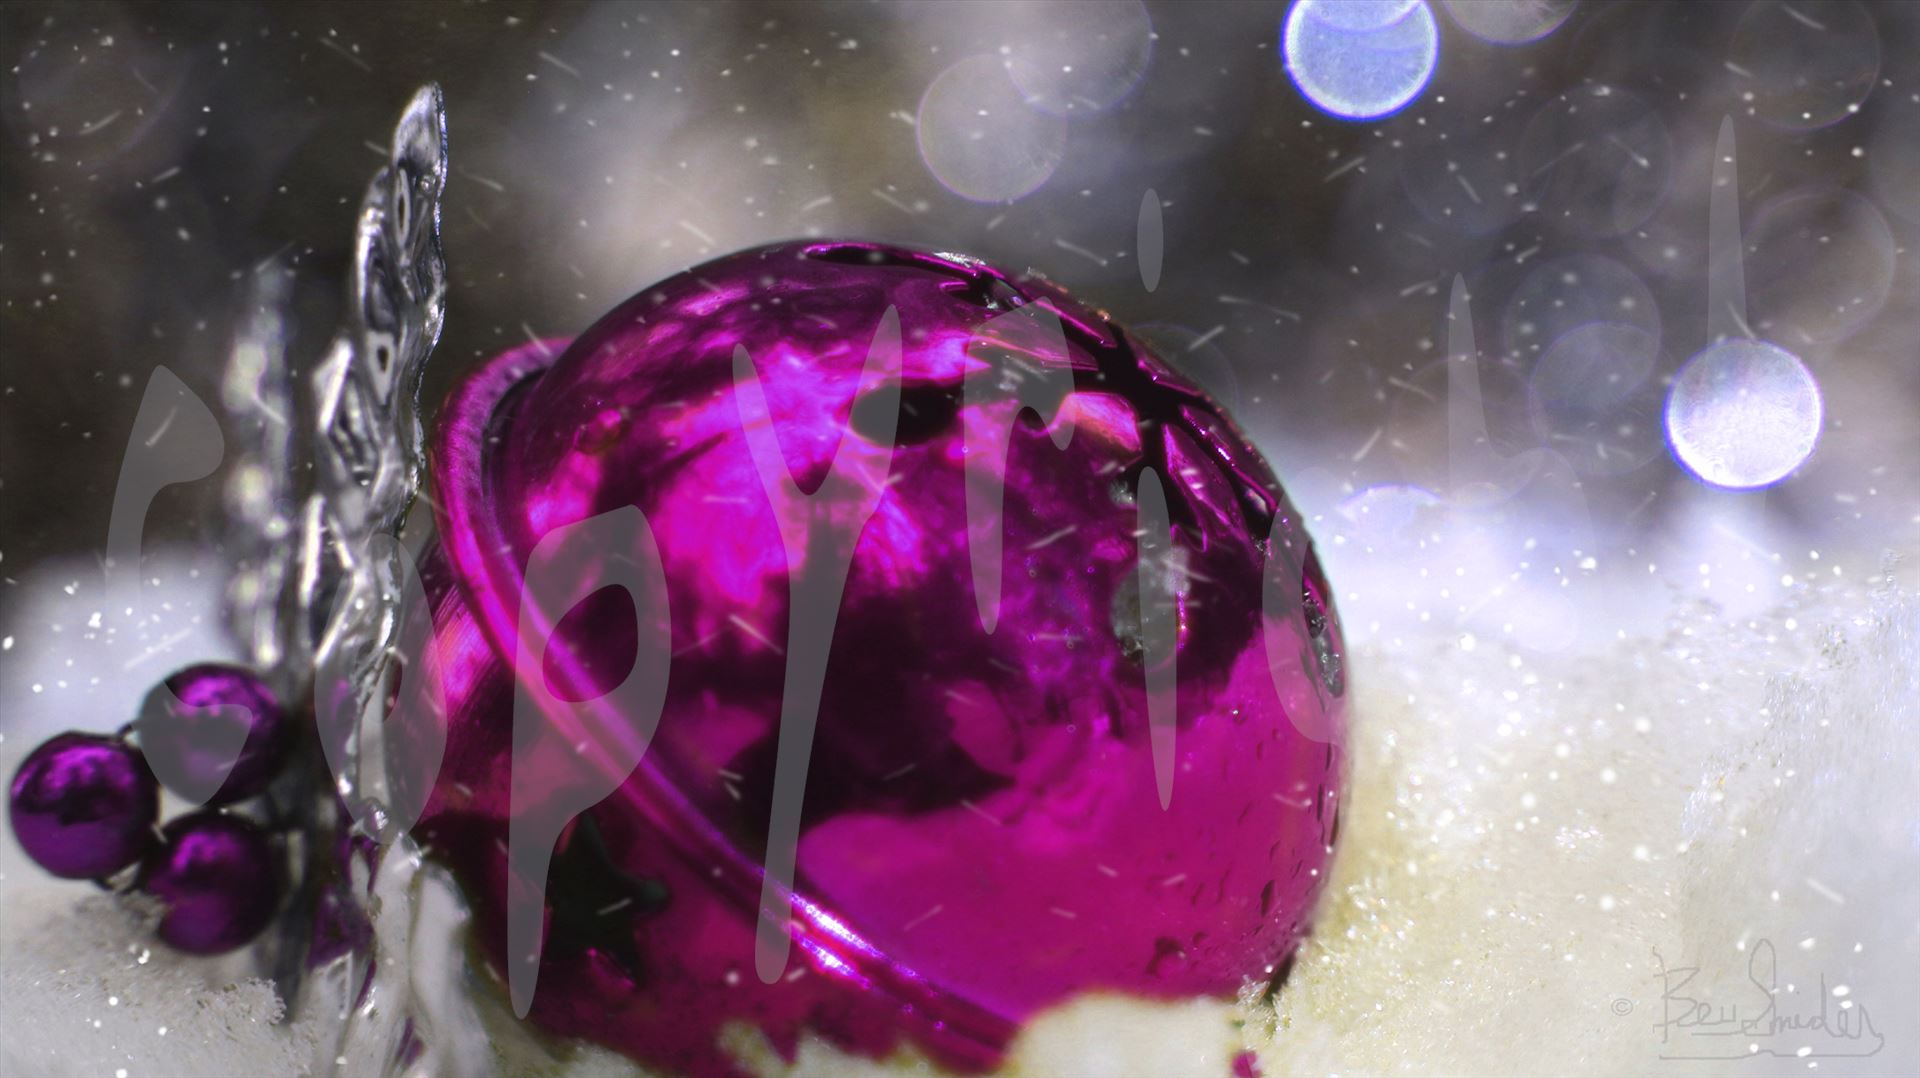 Fuschia Christmas Ball 6657 - Fuschia Christmas Ball in the snow with bokeh background by Snookies Place of Wildlife and Nature